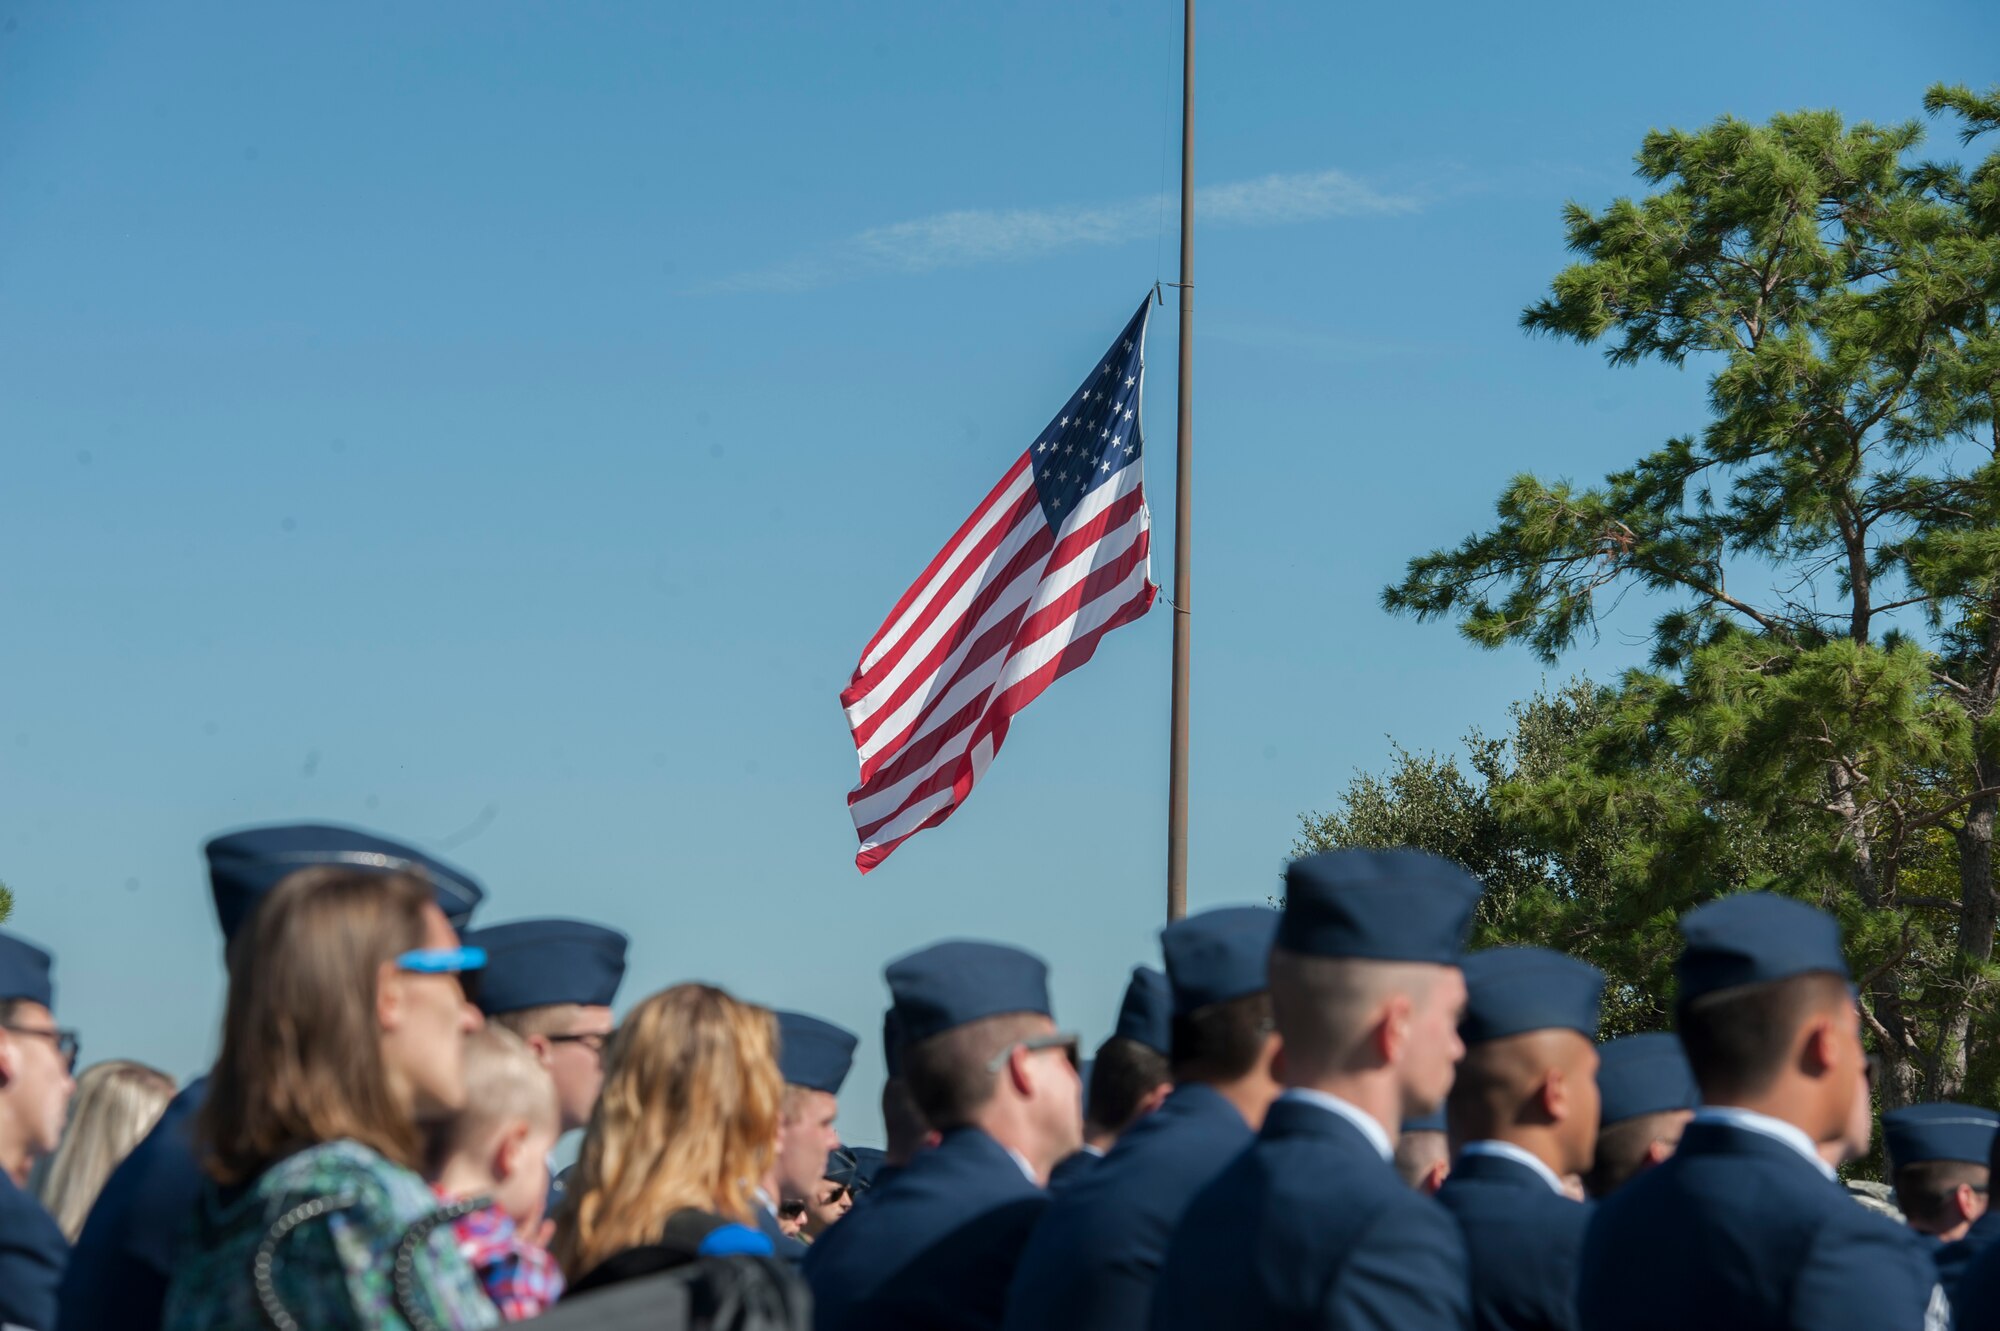 The American flag waves during the TORQE 62 memorial ceremony at Dyess Air Force Base, Sept. 30, 2016. Airmen, family, friends and members of the Abilene community were present to honor the fallen Airmen of TORQE 62. (U.S. Air Force photo by Airman 1st Class Rebecca Van Syoc)